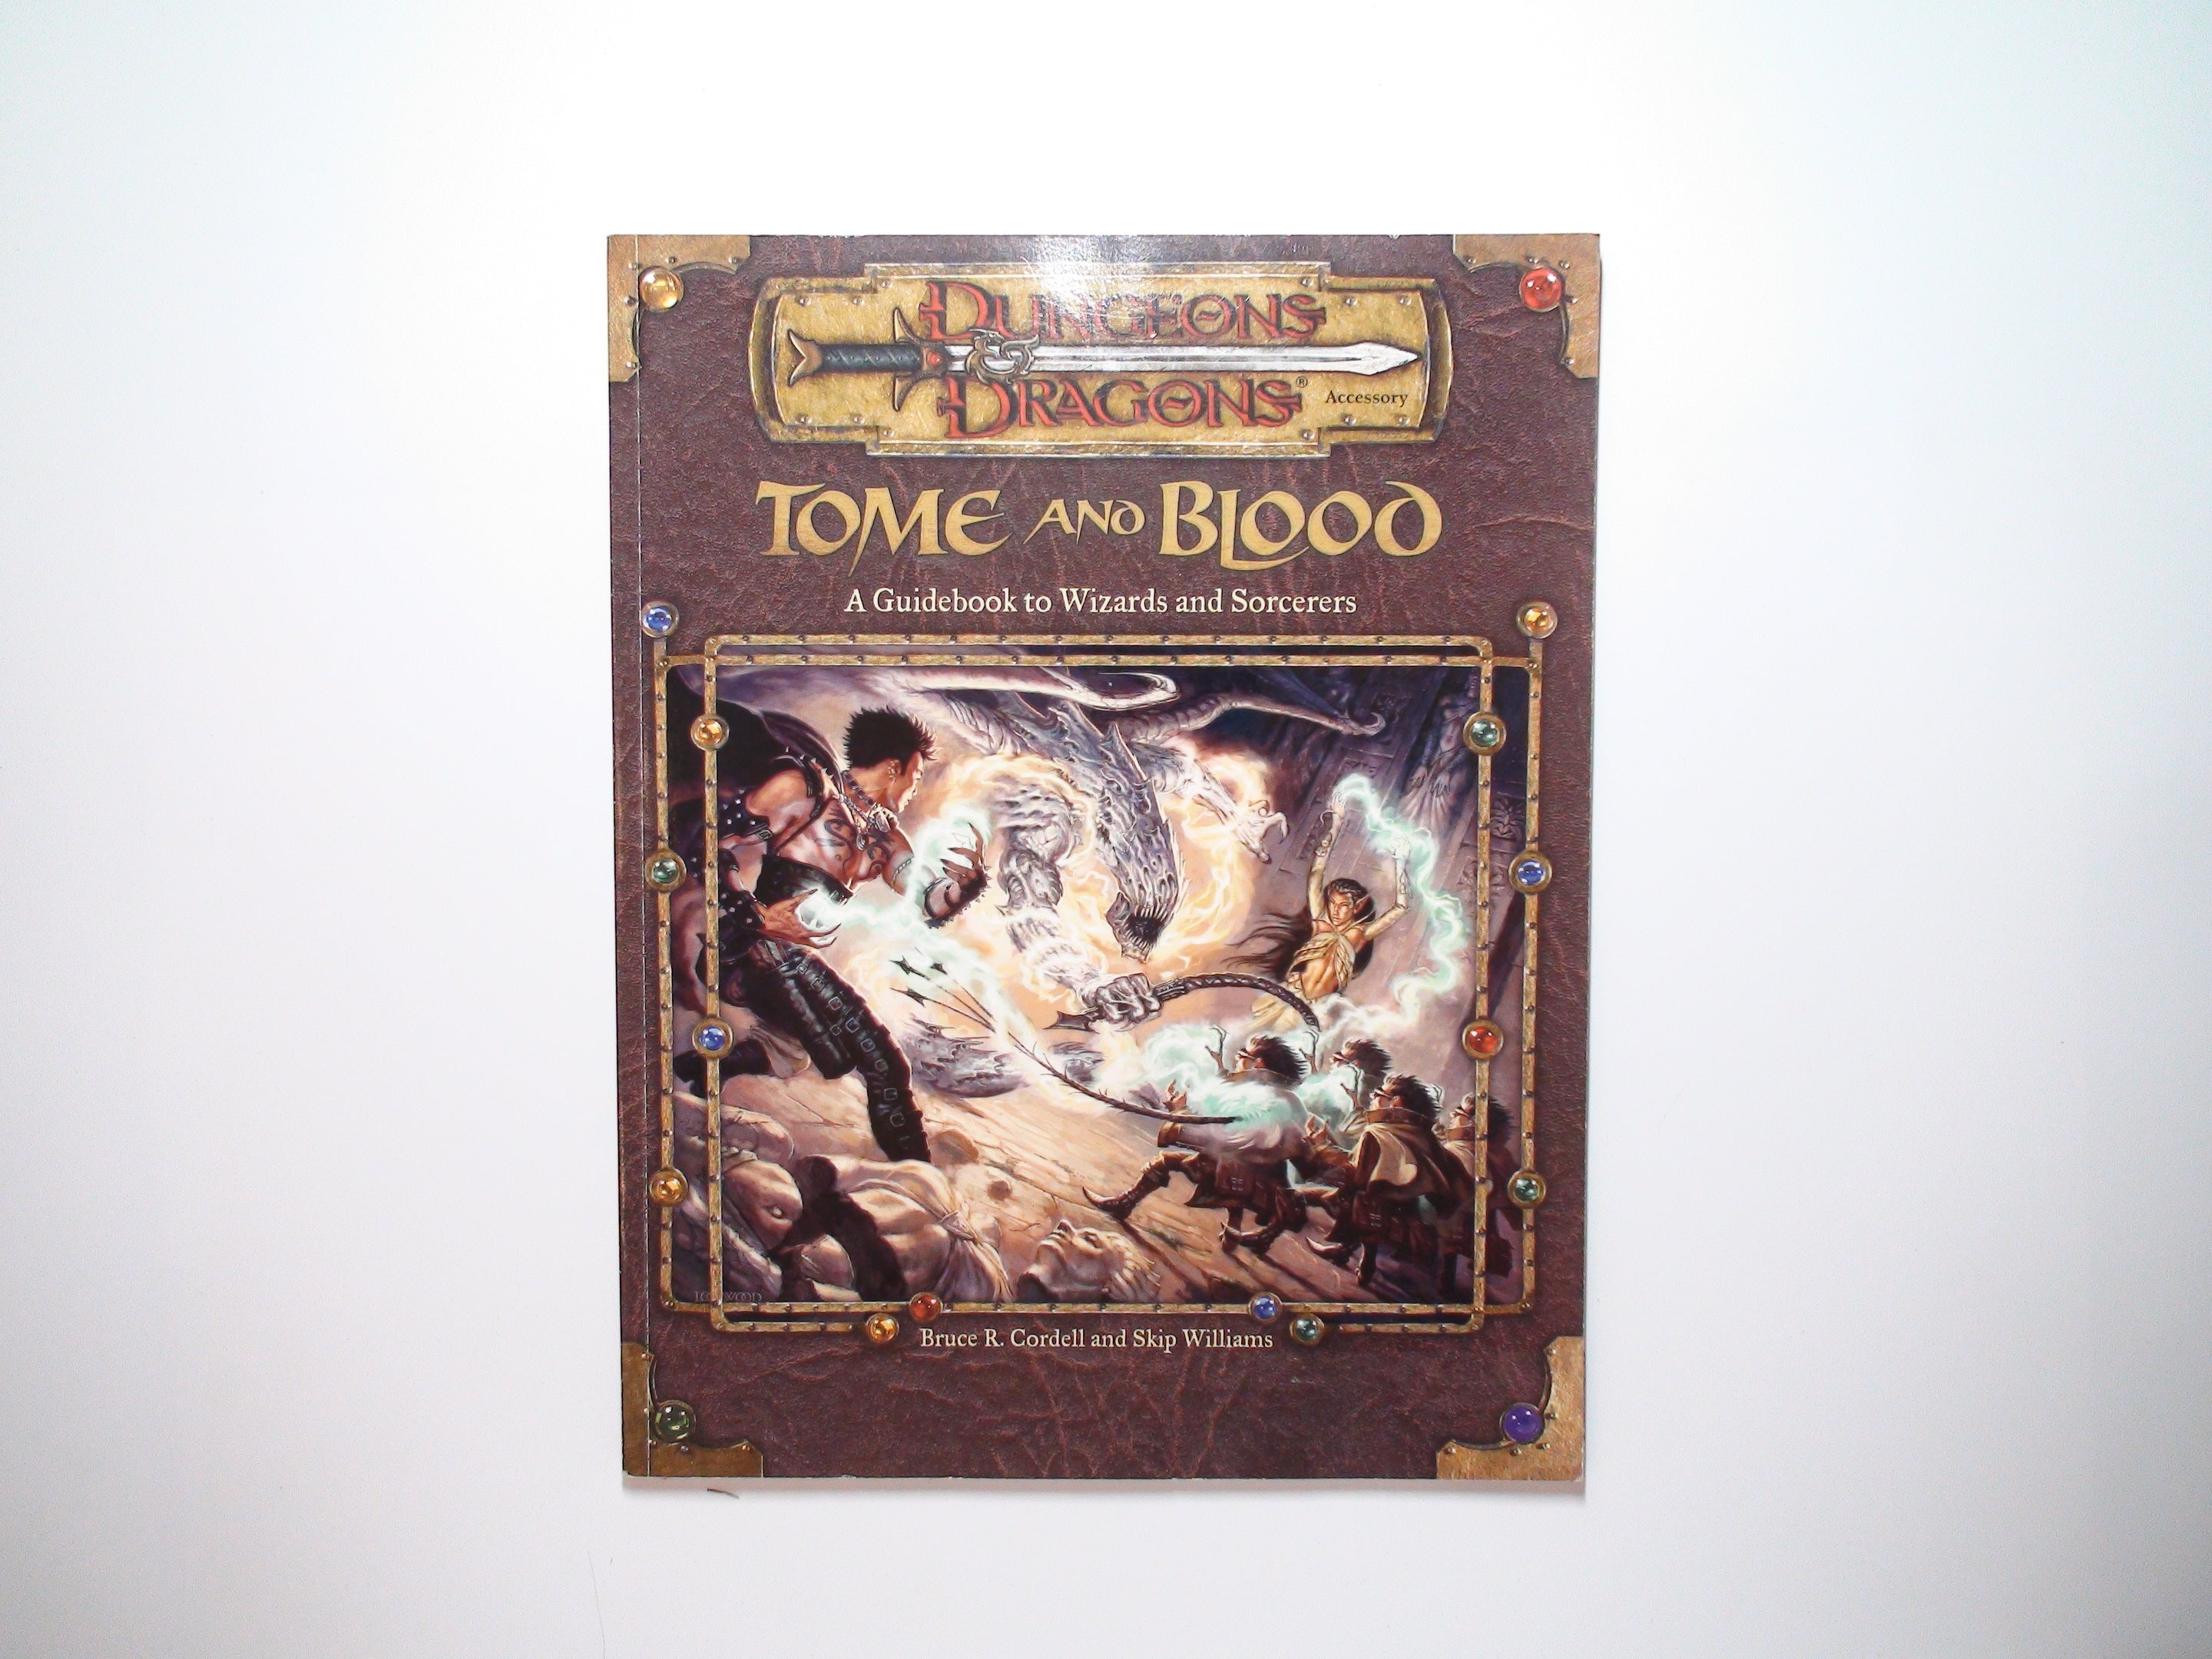 Tome and Blood, Dungeons and Dragons 3.5, 1st Printing, WTC11845, 2001